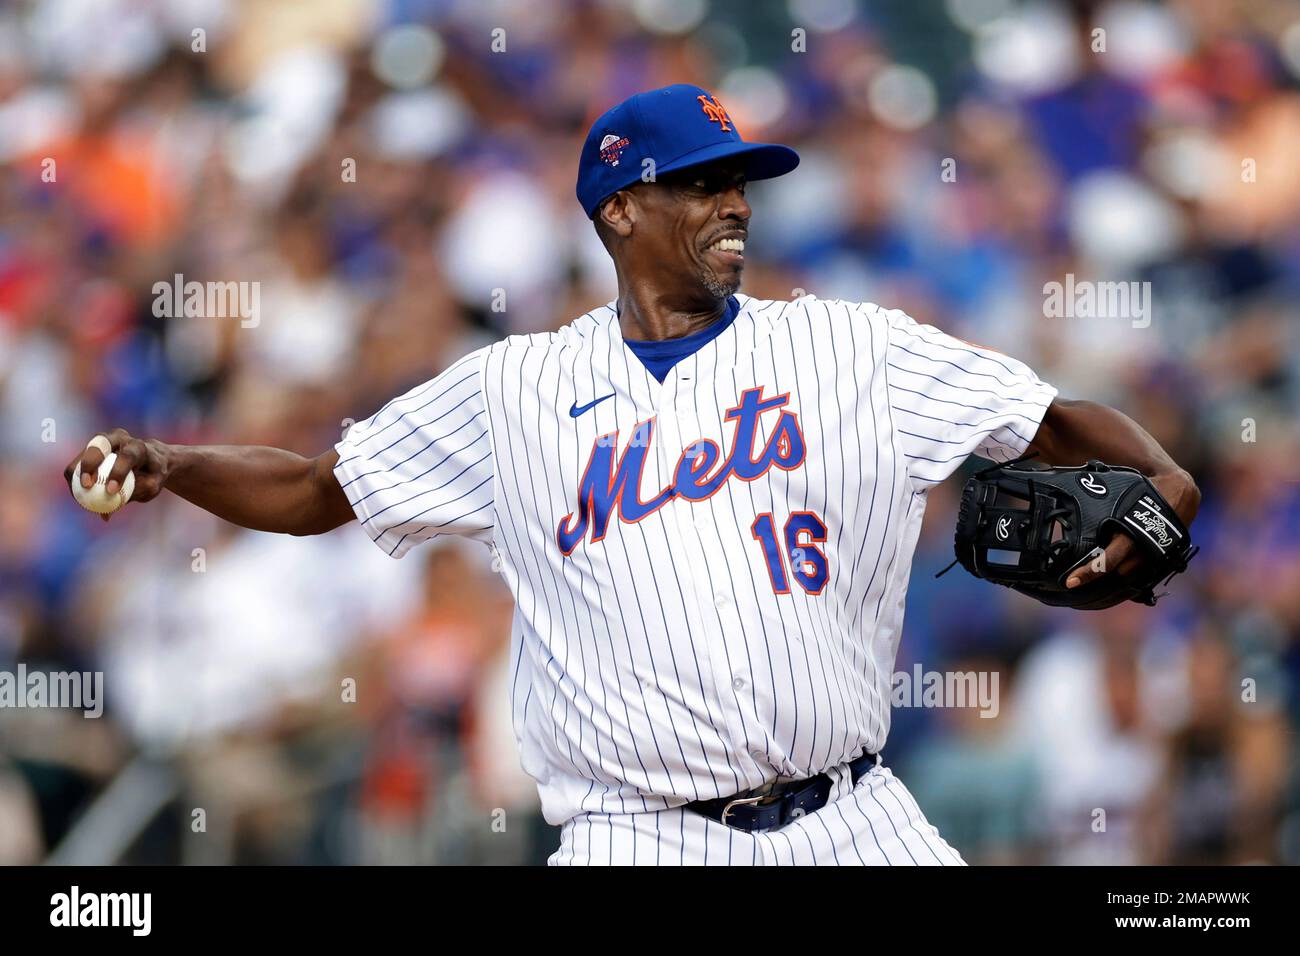 Former New York Mets pitcher Dwight Gooden throws during an Old-Timers'  game before a baseball game between the Colorado Rockies and the New York  Mets on Saturday, Aug. 27, 2022, in New